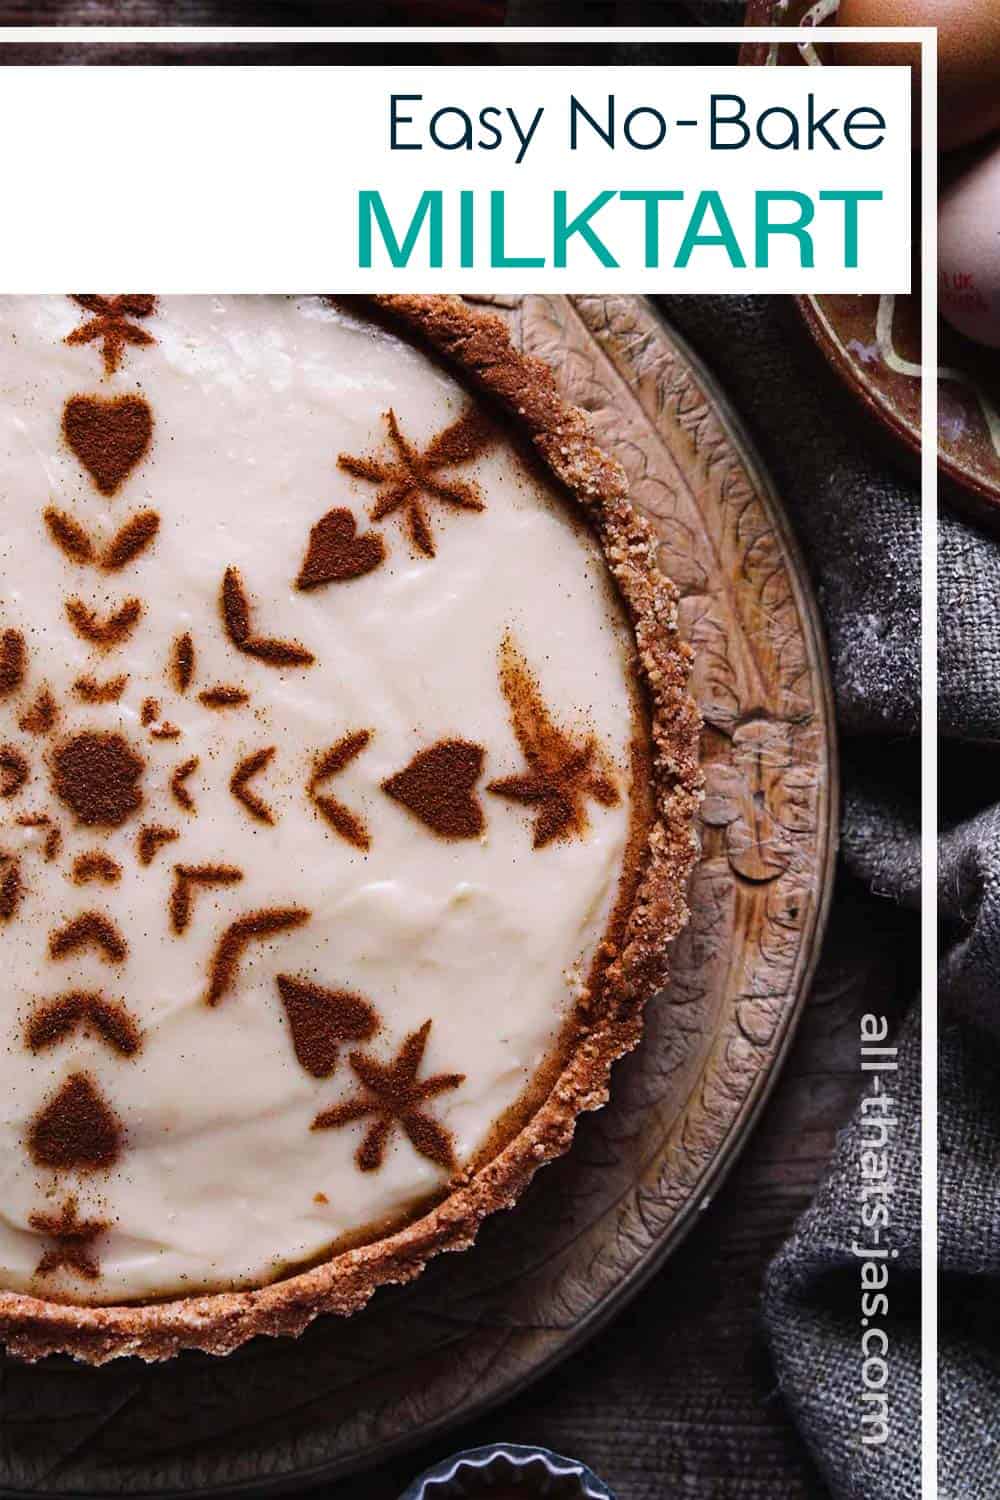 A close up of the cinnamon milk tart with text overlay.